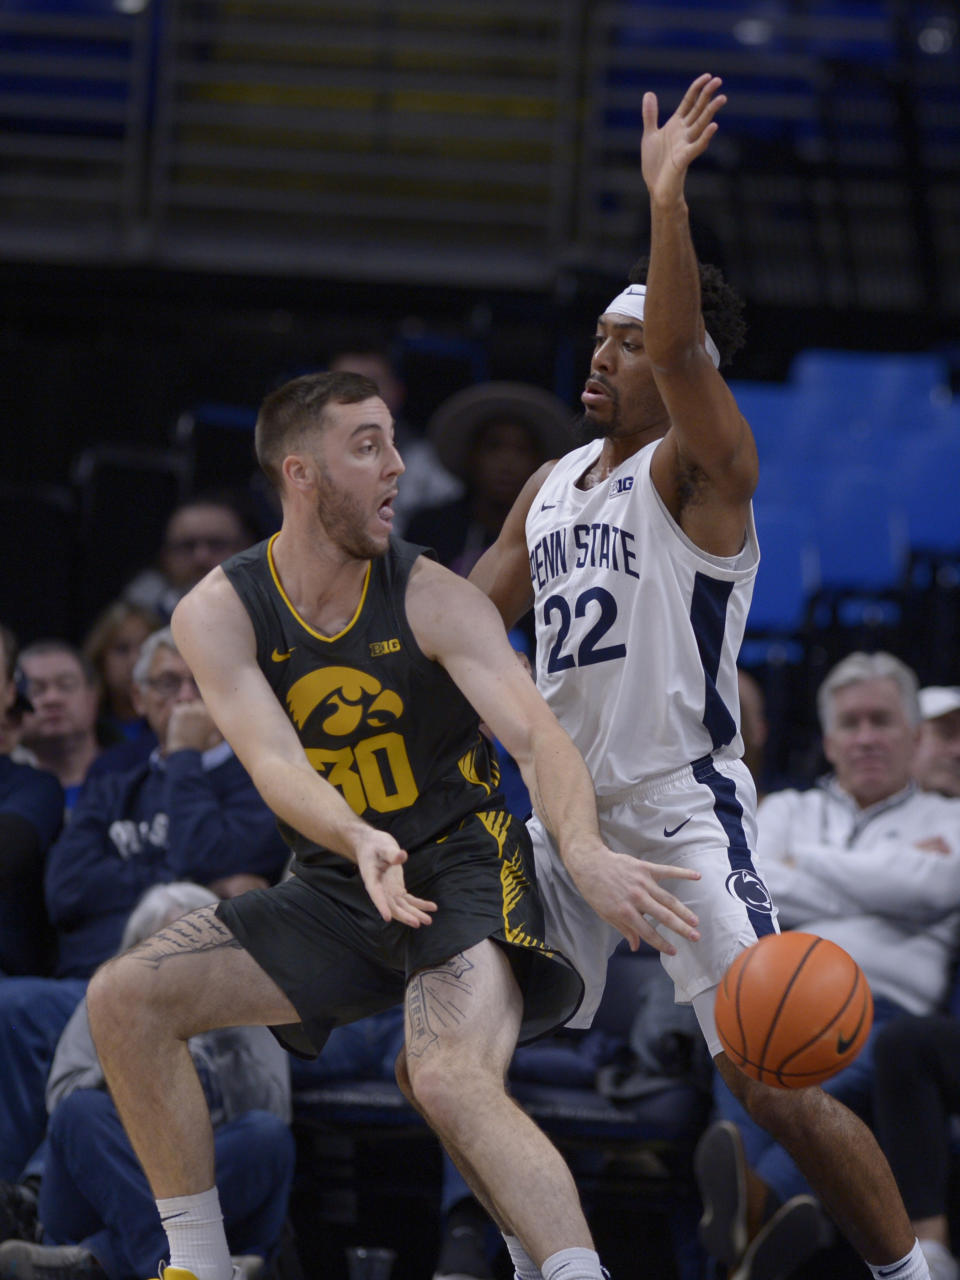 Iowa's Connor McCaffery (30) passes around Penn State's Jalen Pickett (22) during the first half of an NCAA college basketball game, Sunday, Jan. 1, 2023, in State College, Pa. (AP Photo/Gary M. Baranec)